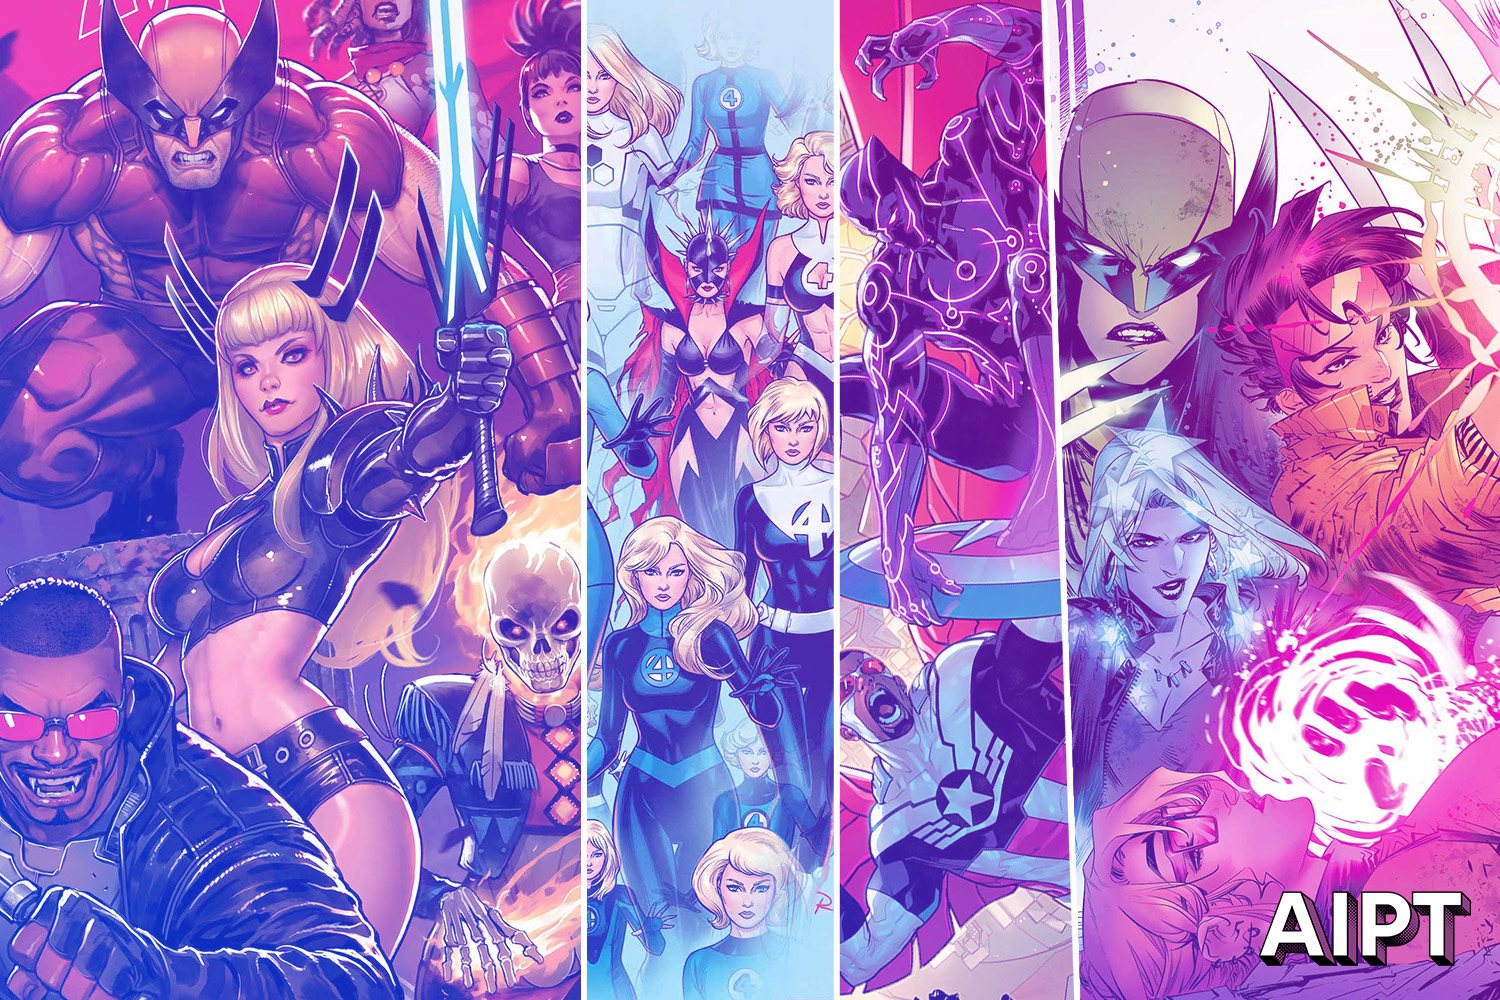 September 2022 Marvel Comics solicitations: A.X.E., Midnight Suns, and more